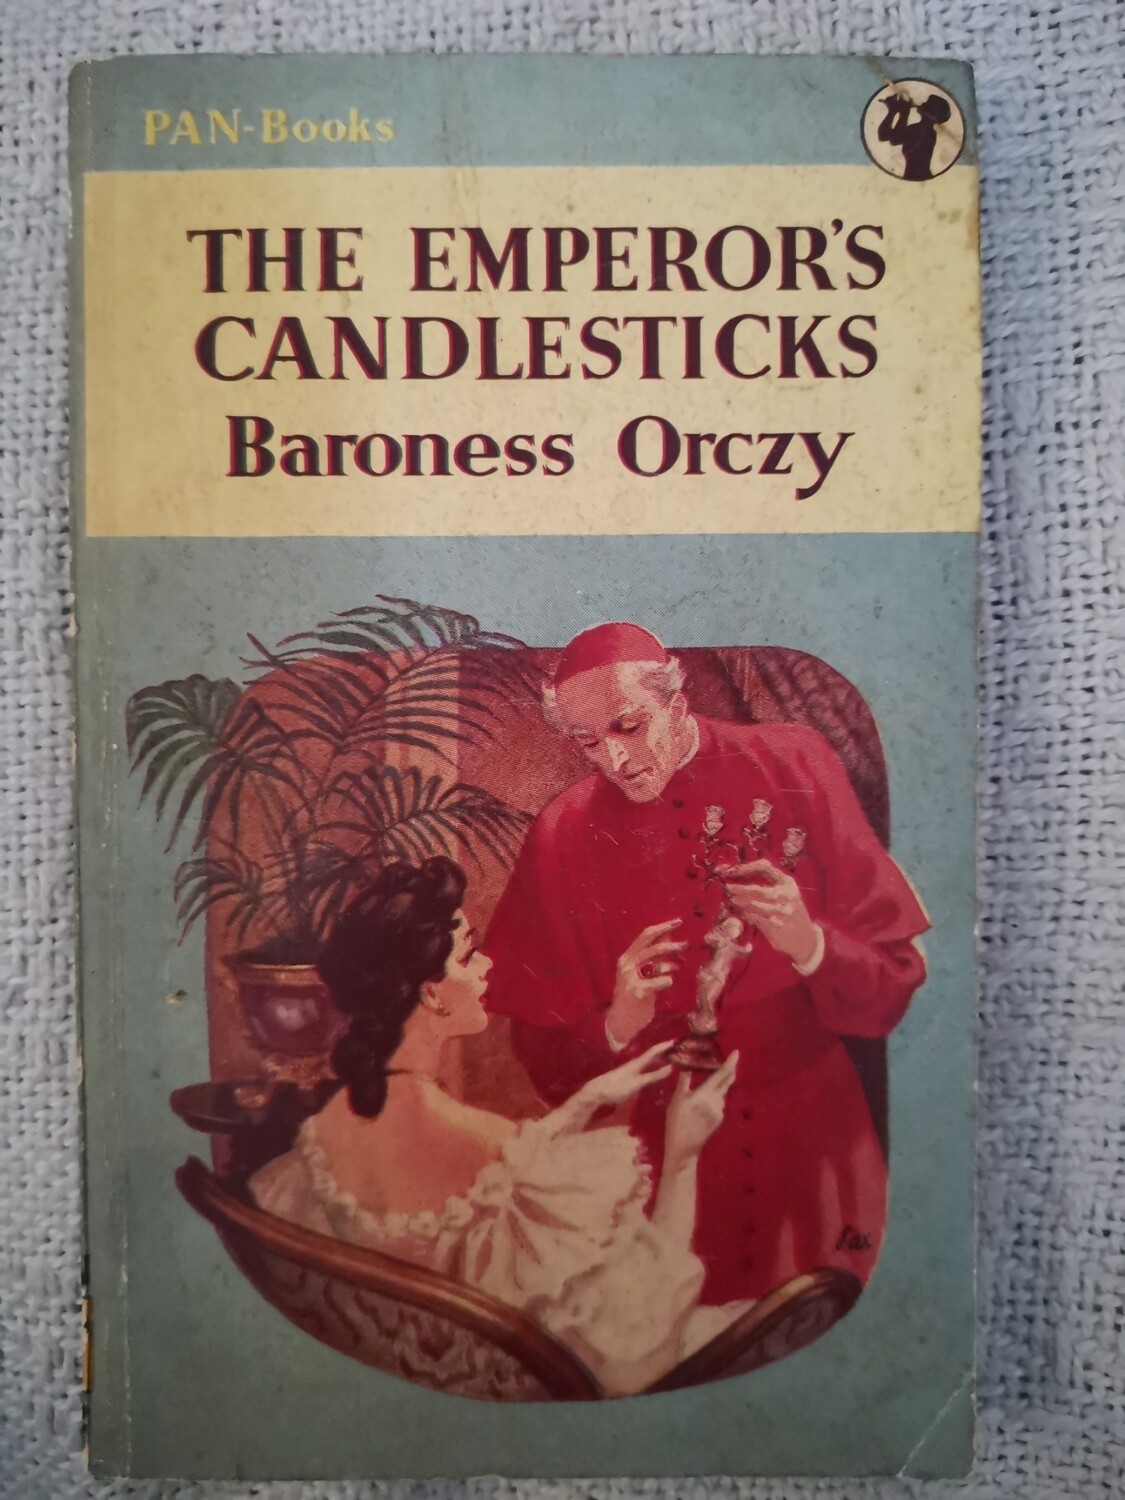 The emperors candlesticks, Baroness Orczy